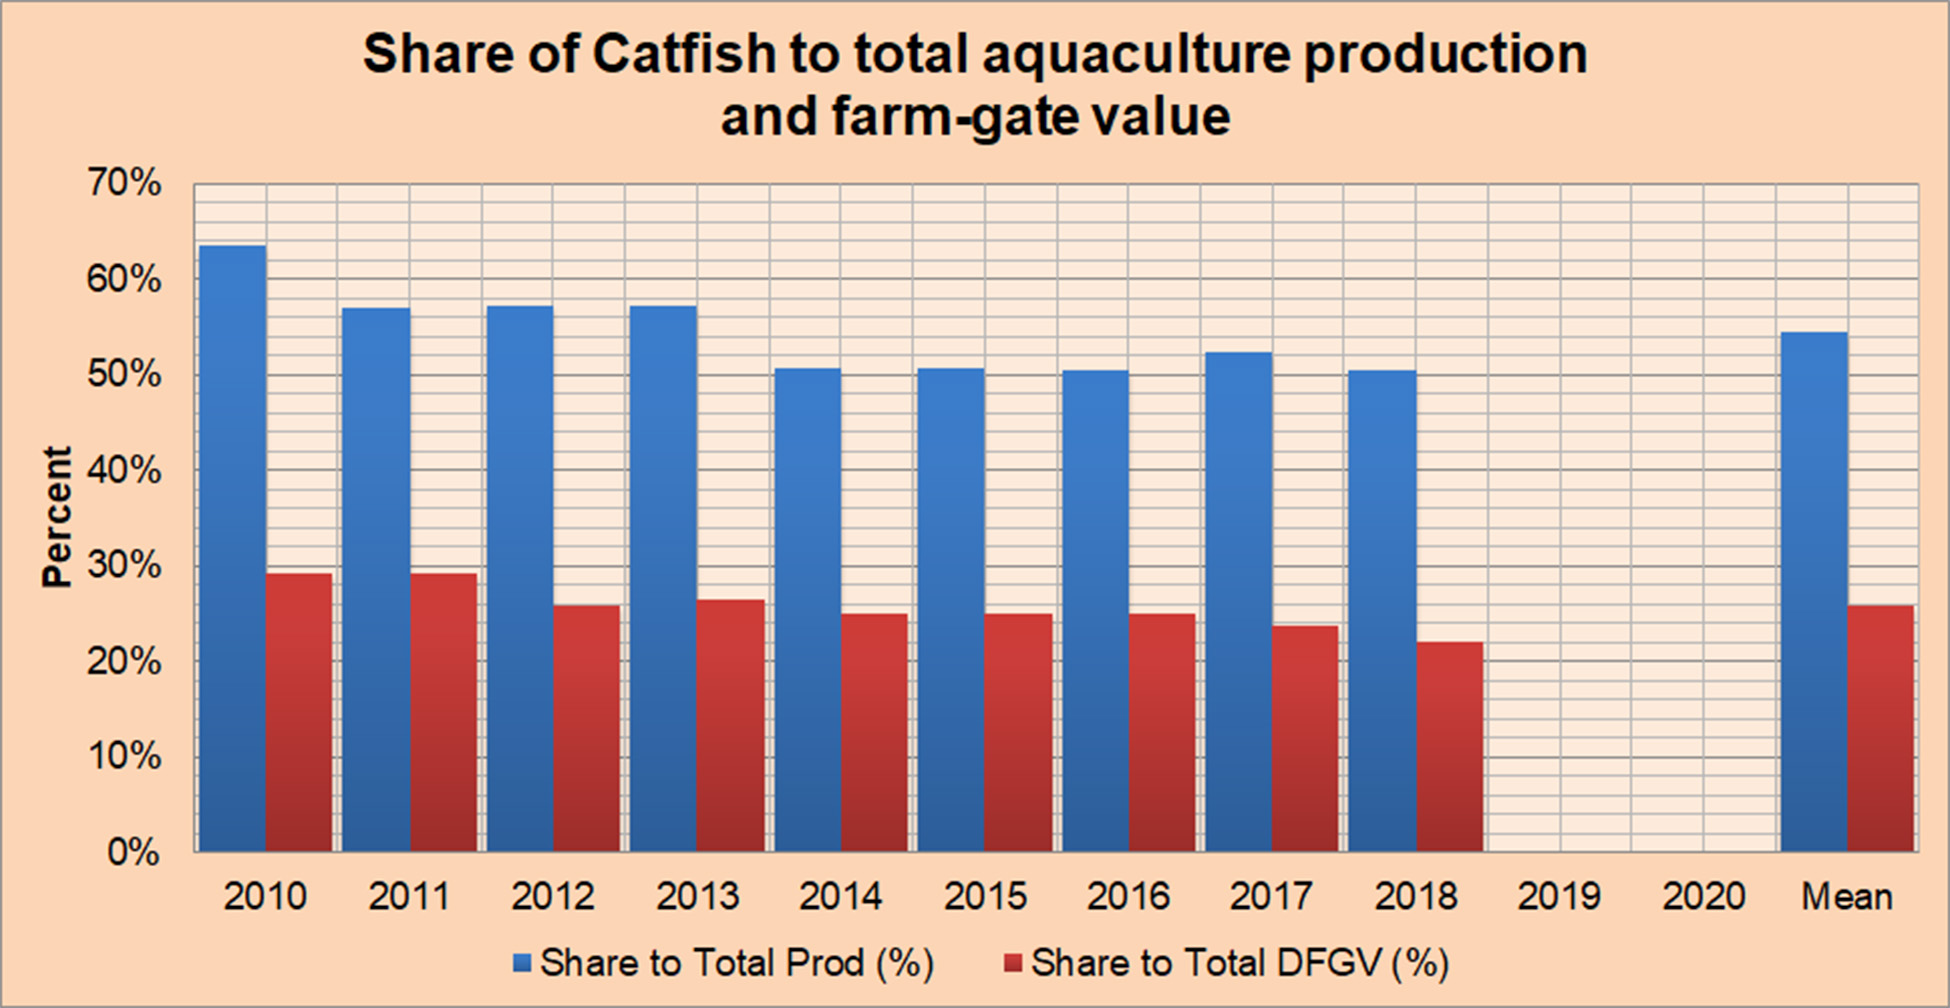 Share of Catfish to Total Aquaculture Production